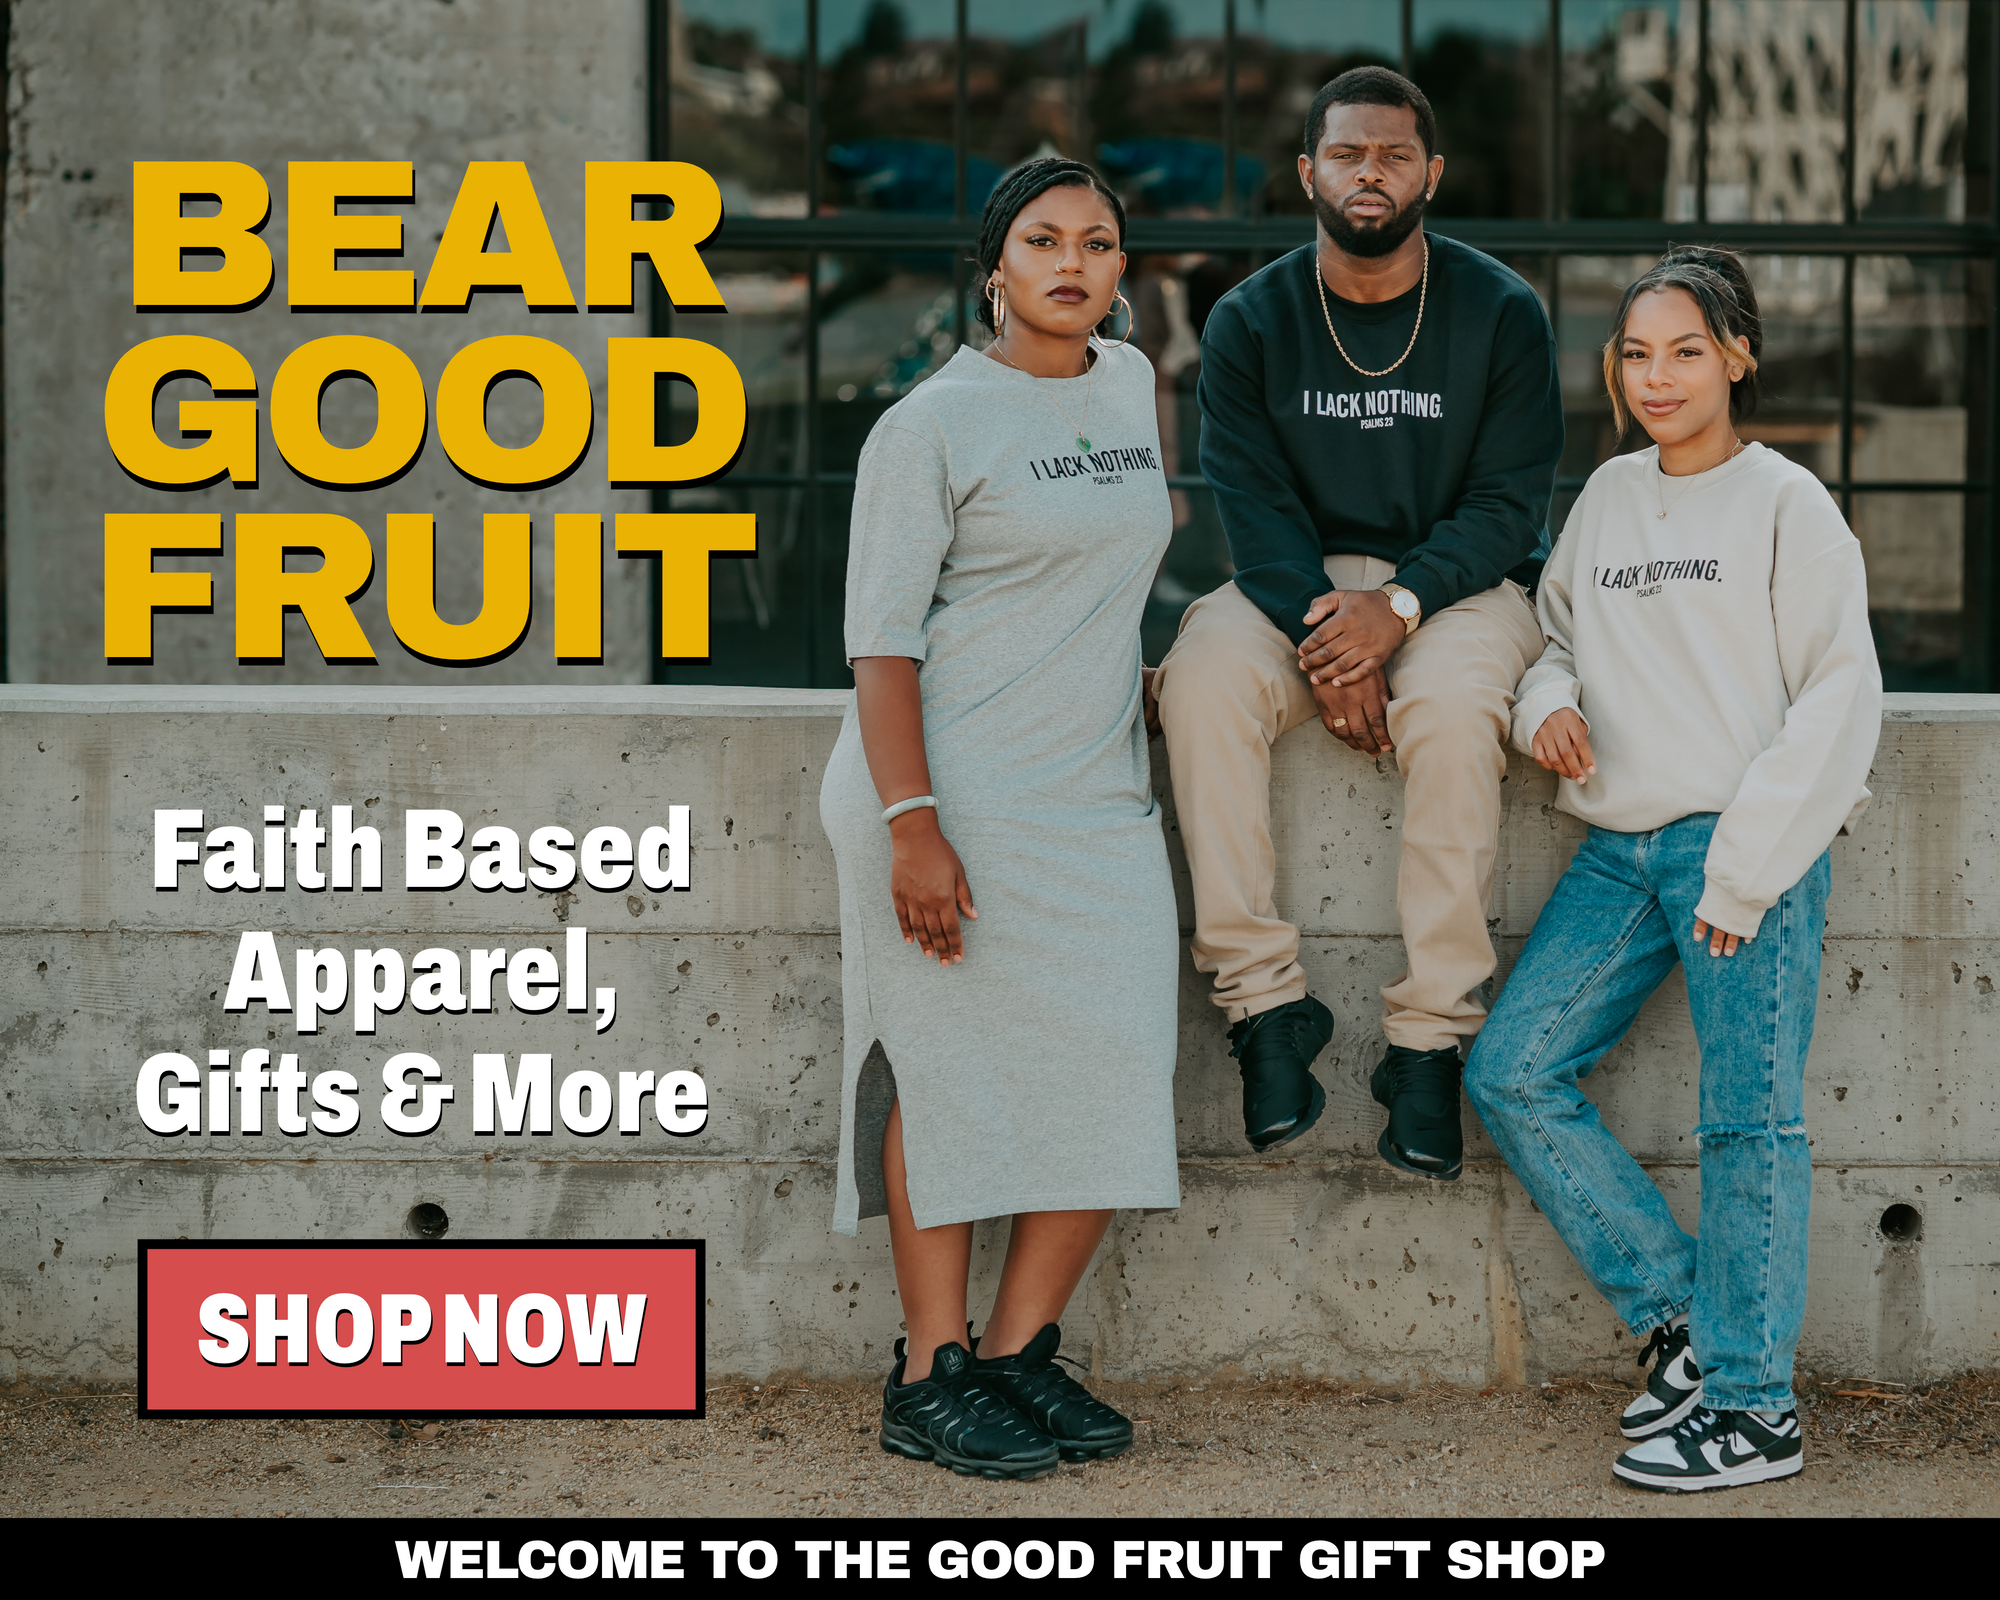 The Good Fruit Gift Shop the home for Faith Based Apparel